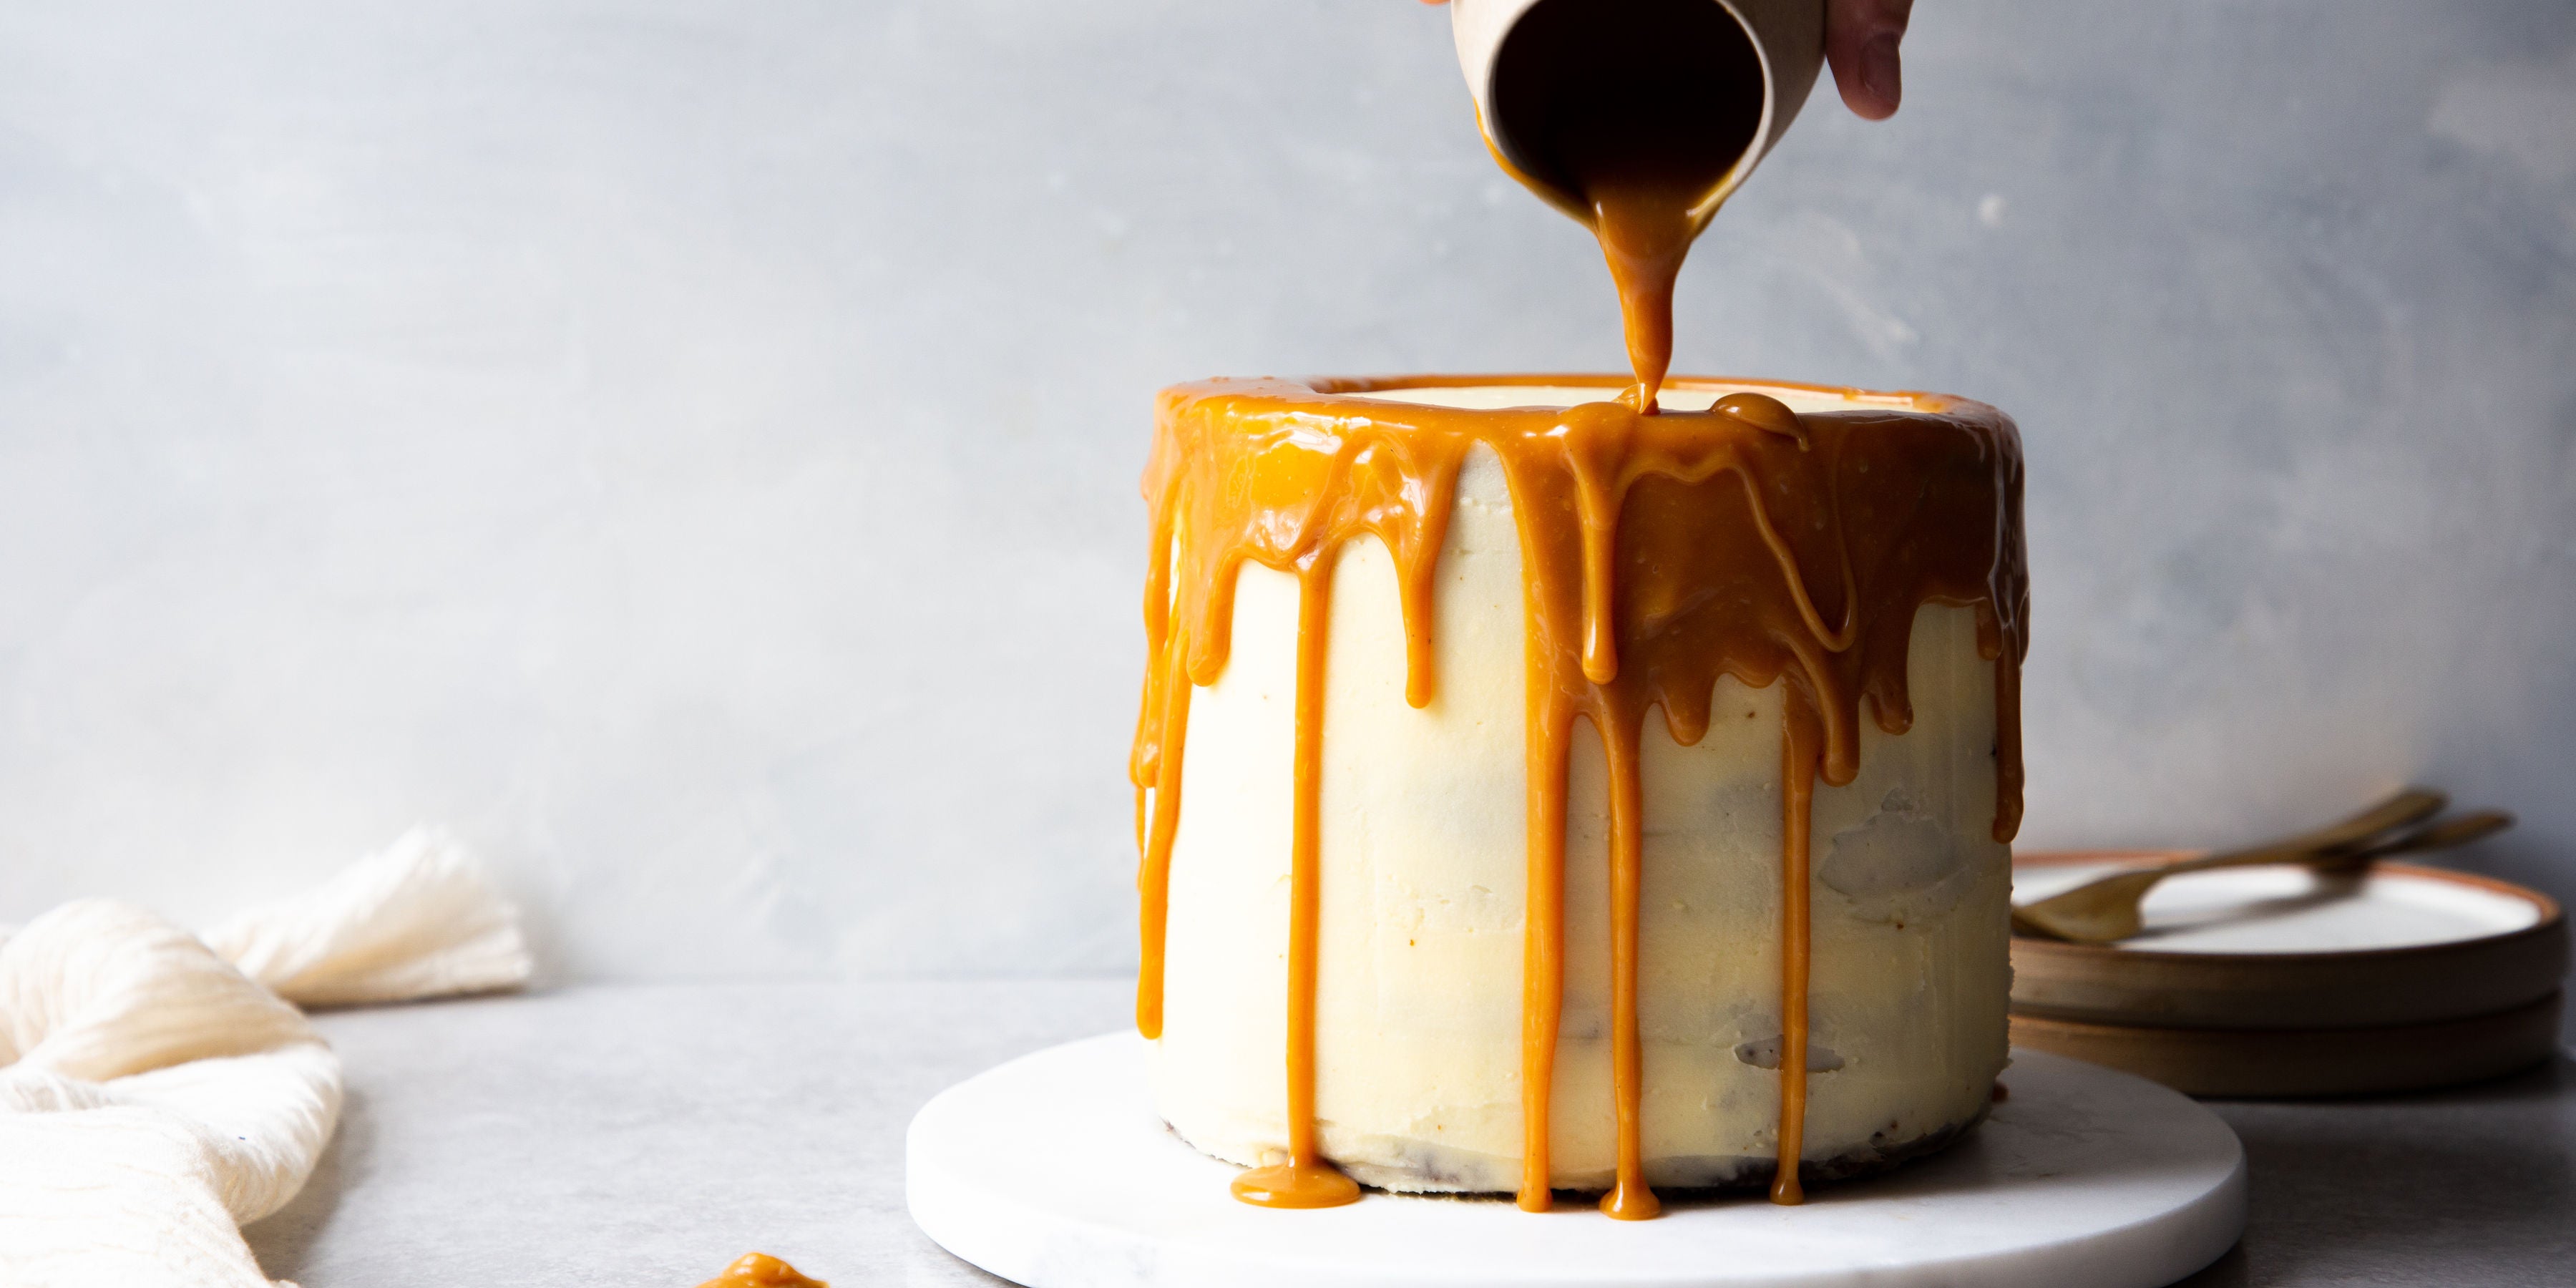 Gingerbread Birthday Cake being drizzled with caramel sauce